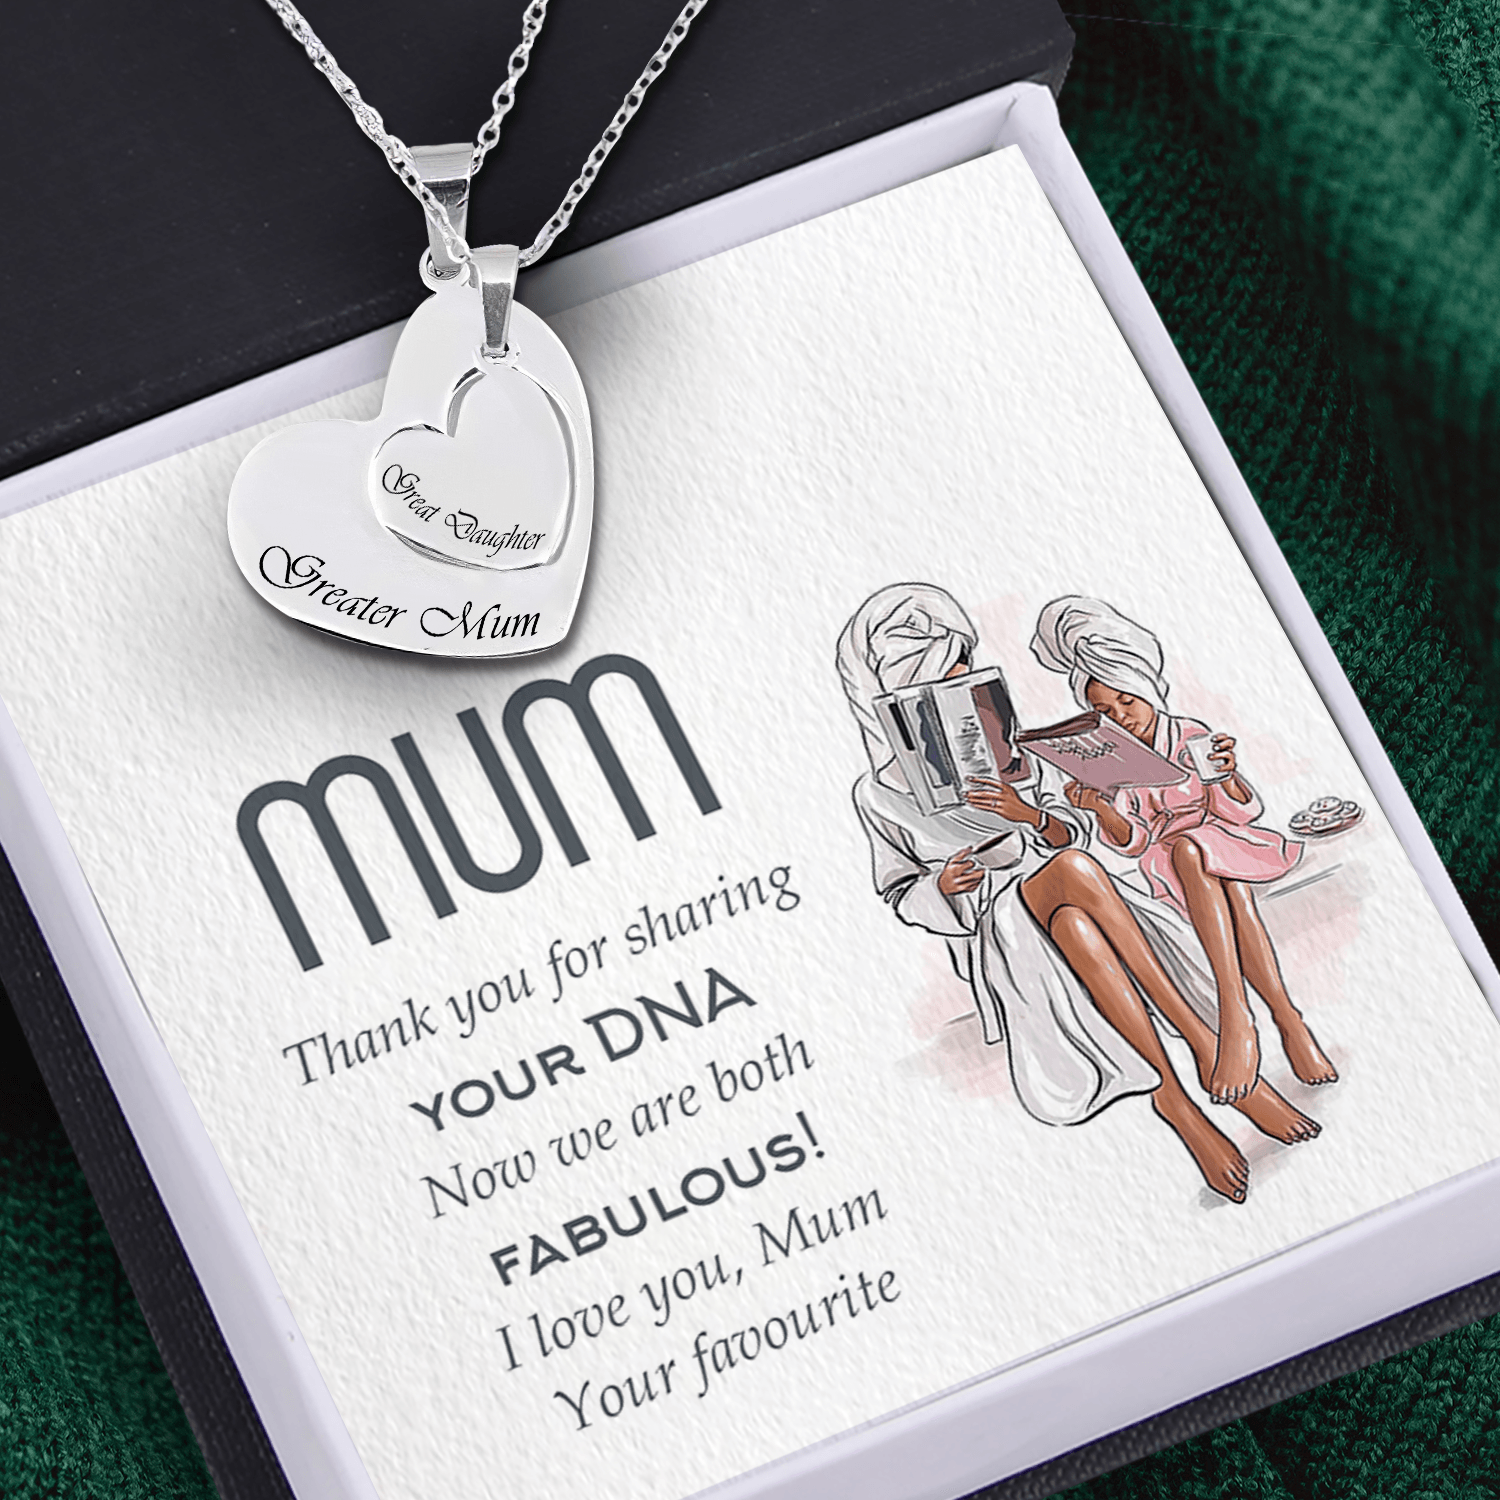 Heart Hollow Necklaces Set - Family - To My Mum - Thank You For Sharing Your DNA - Augnfb19012 - Gifts Holder